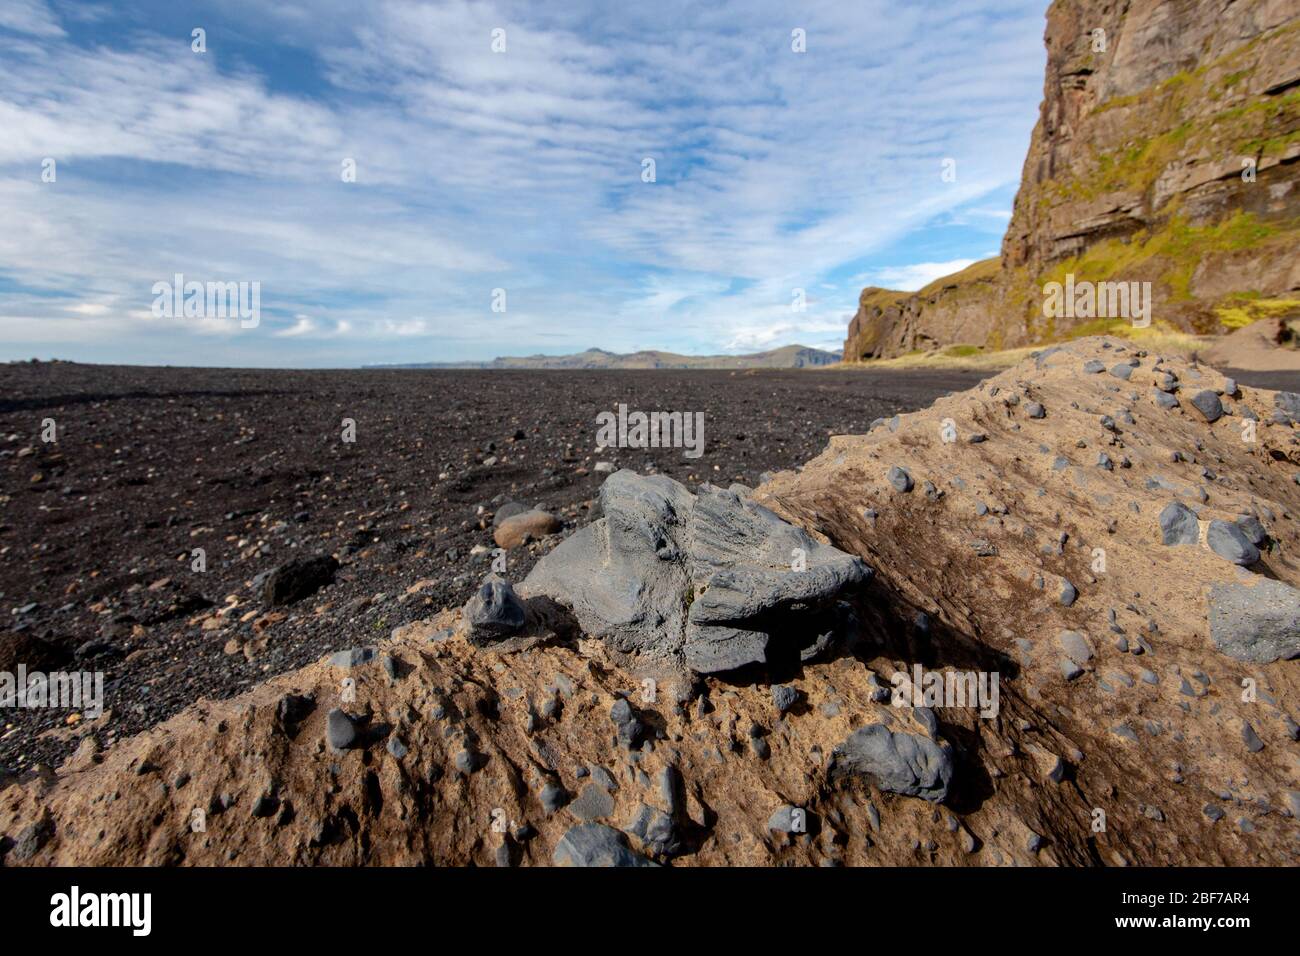 A close-up view of breccia, with chunks of volcanic rock in a light-brown matrix; volcanic sand, cliffs, and a partly cloudy sky are in the background Stock Photo